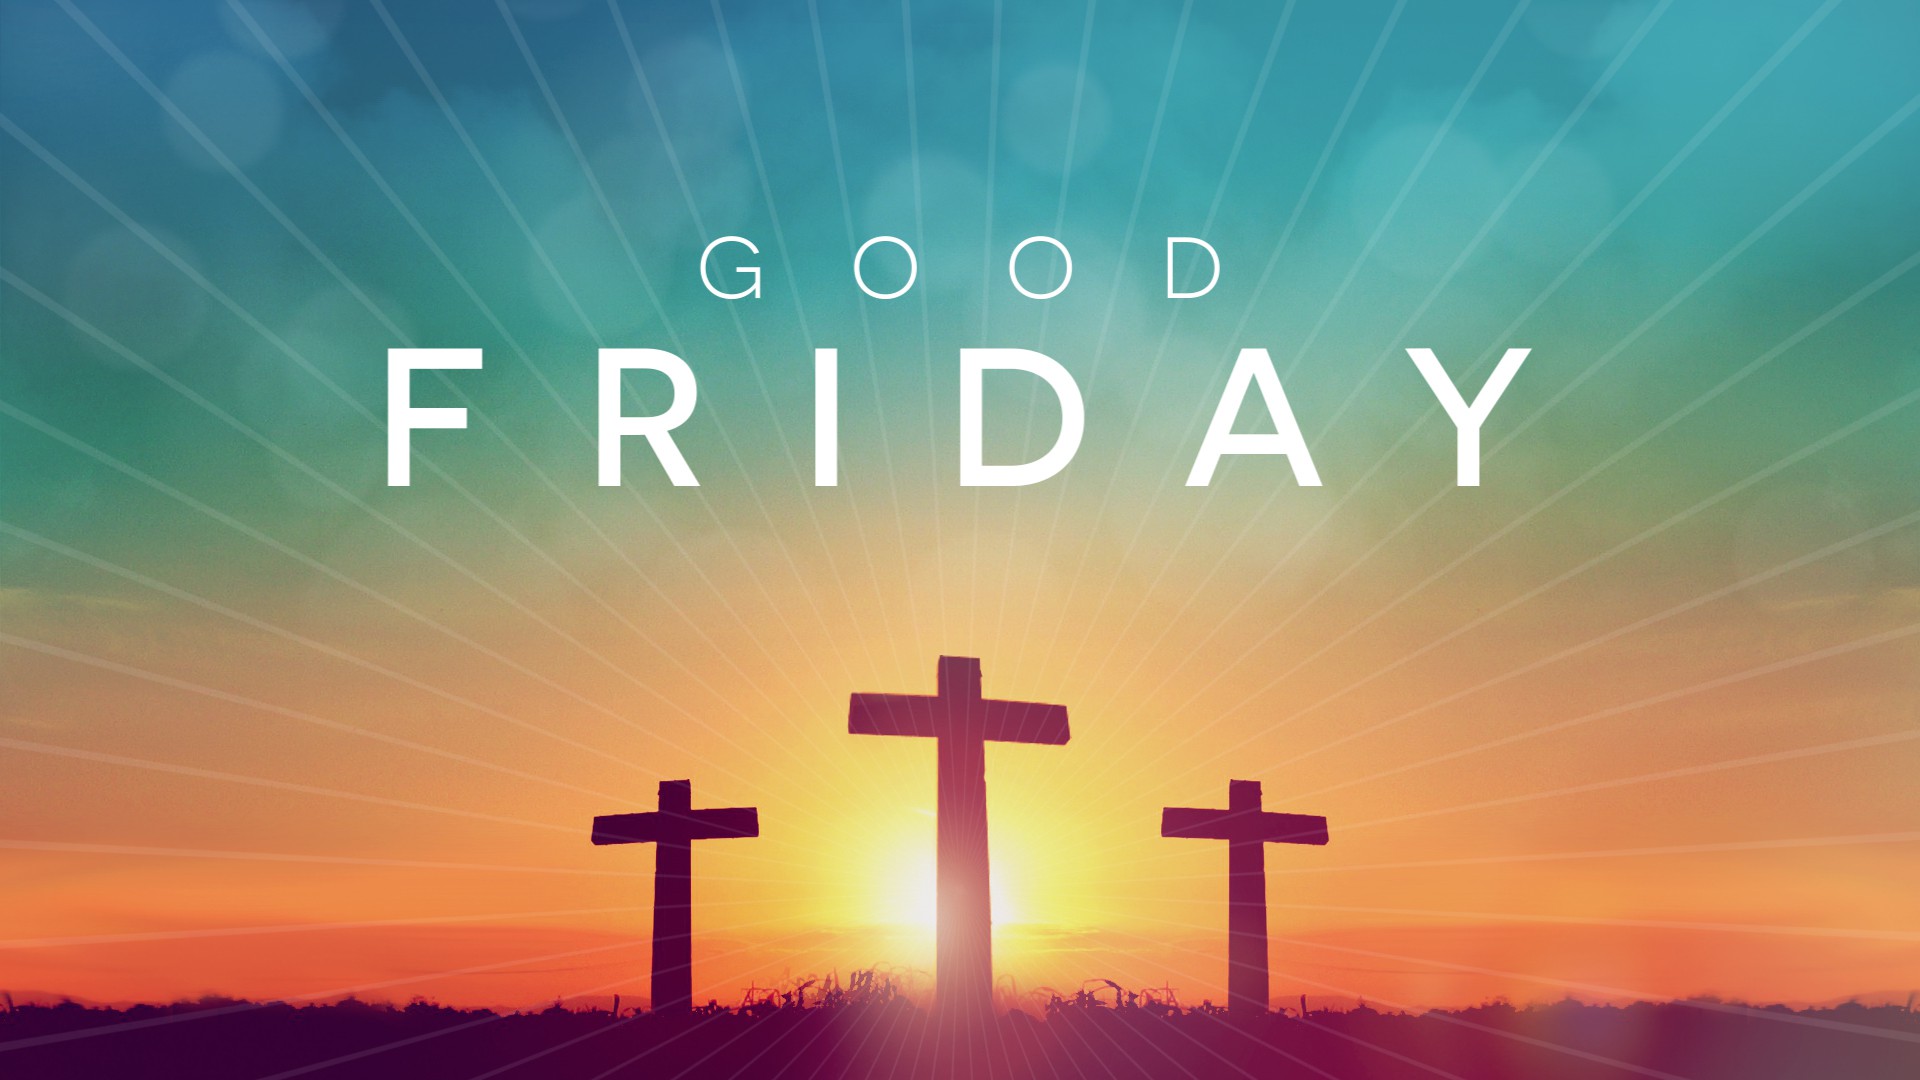 good friday sunset free awesome image for mobile